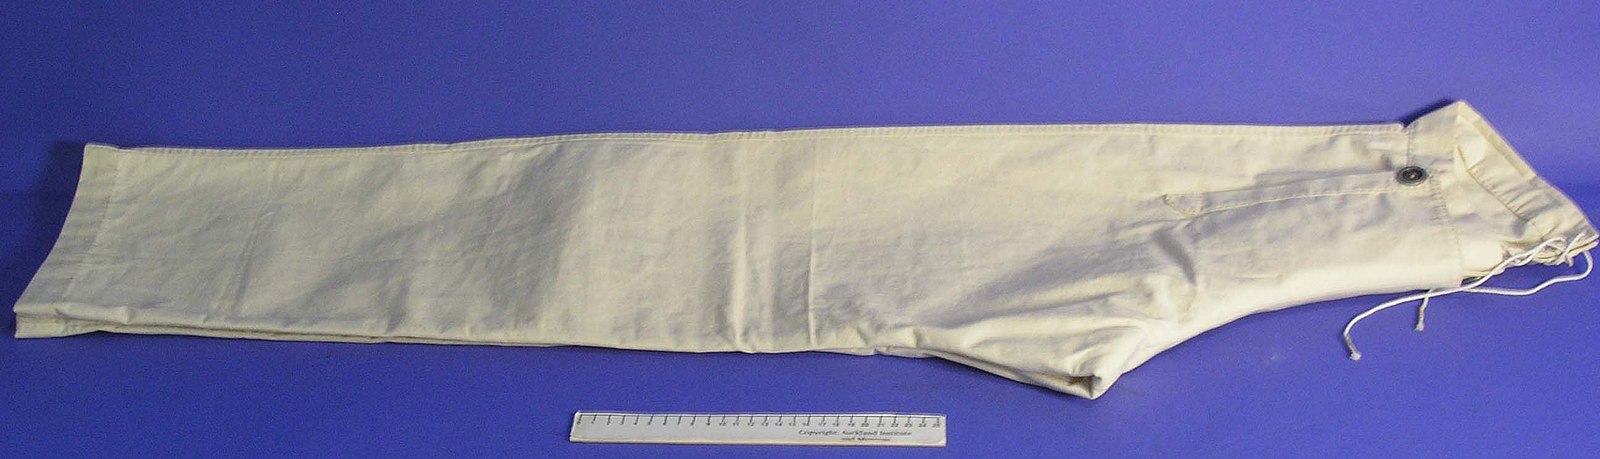 Trousers lying next to a ruler